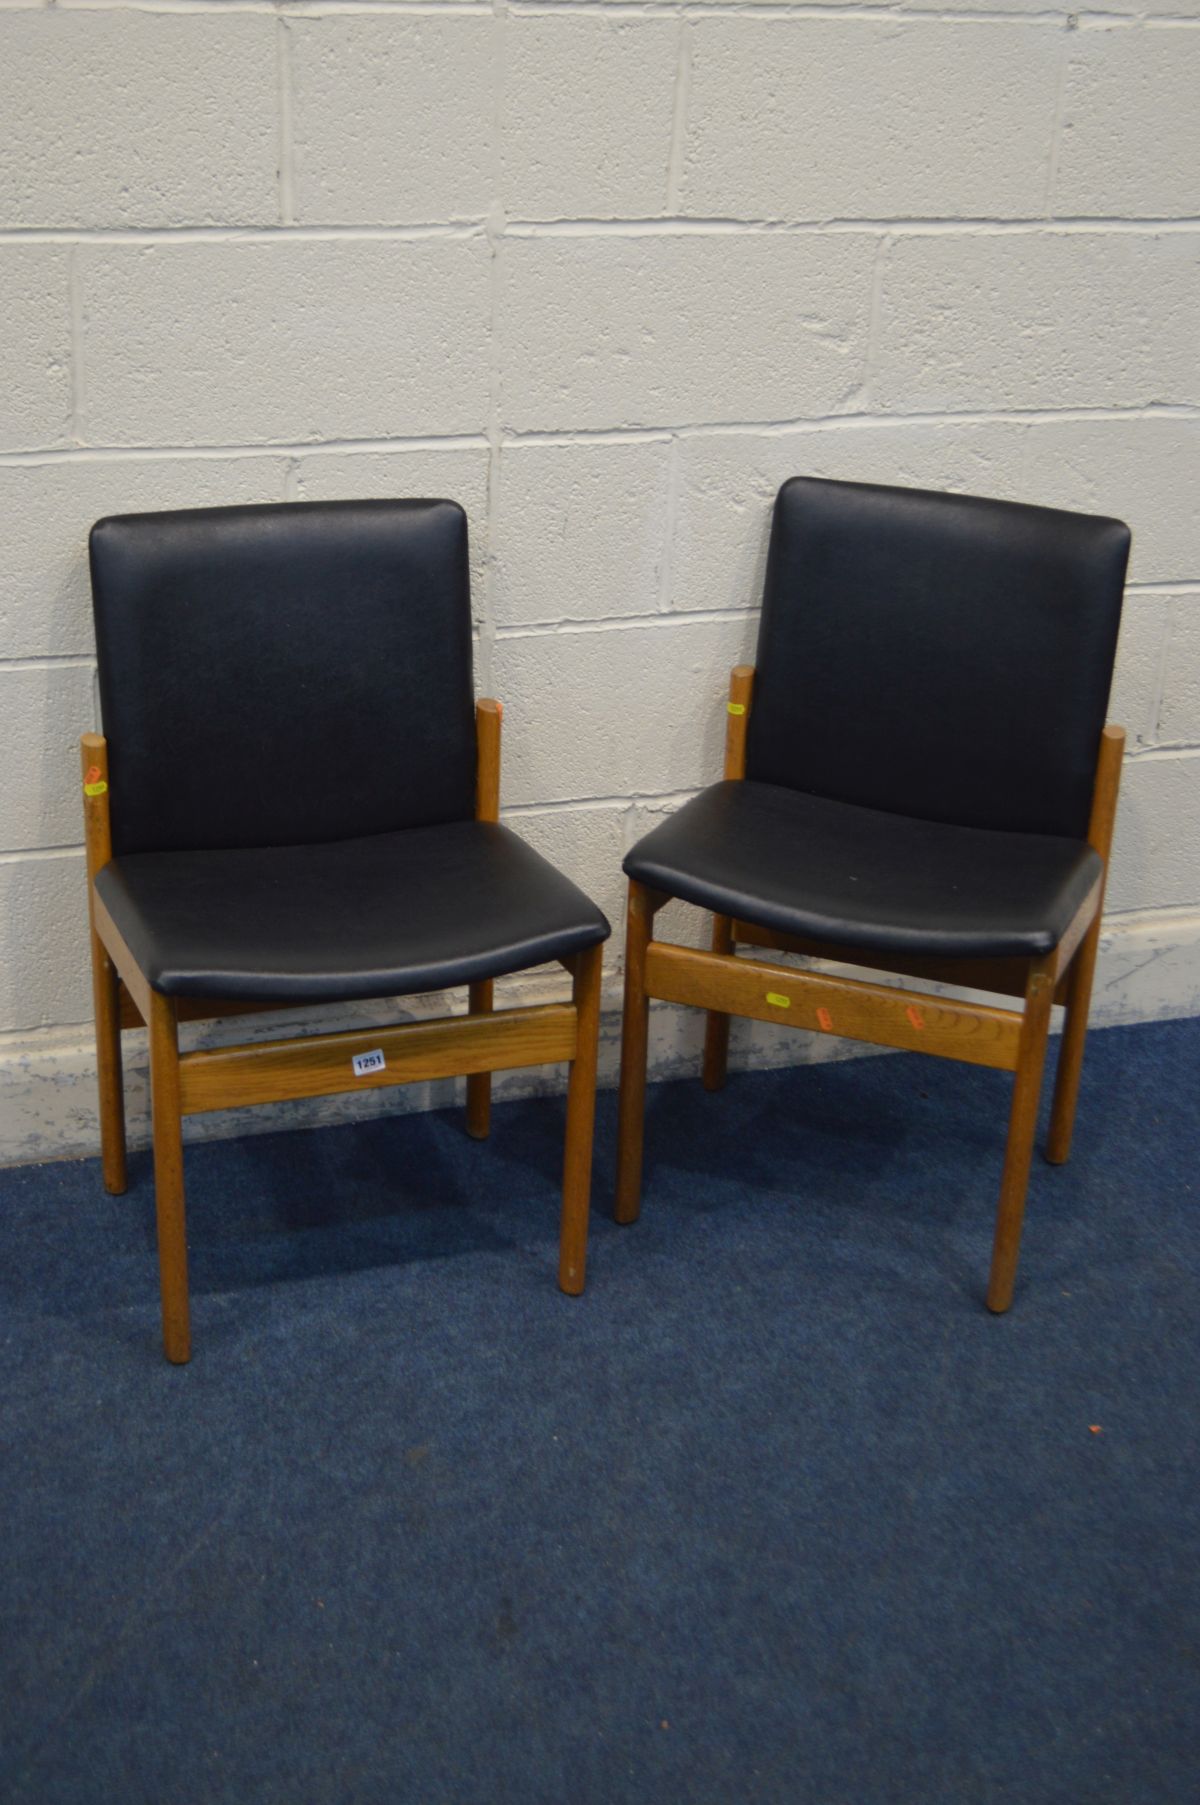 A PAIR OF MID TO LATE 20TH CENTURY OAK FRAMED AND BLACK LEATHERETTE CHAIRS